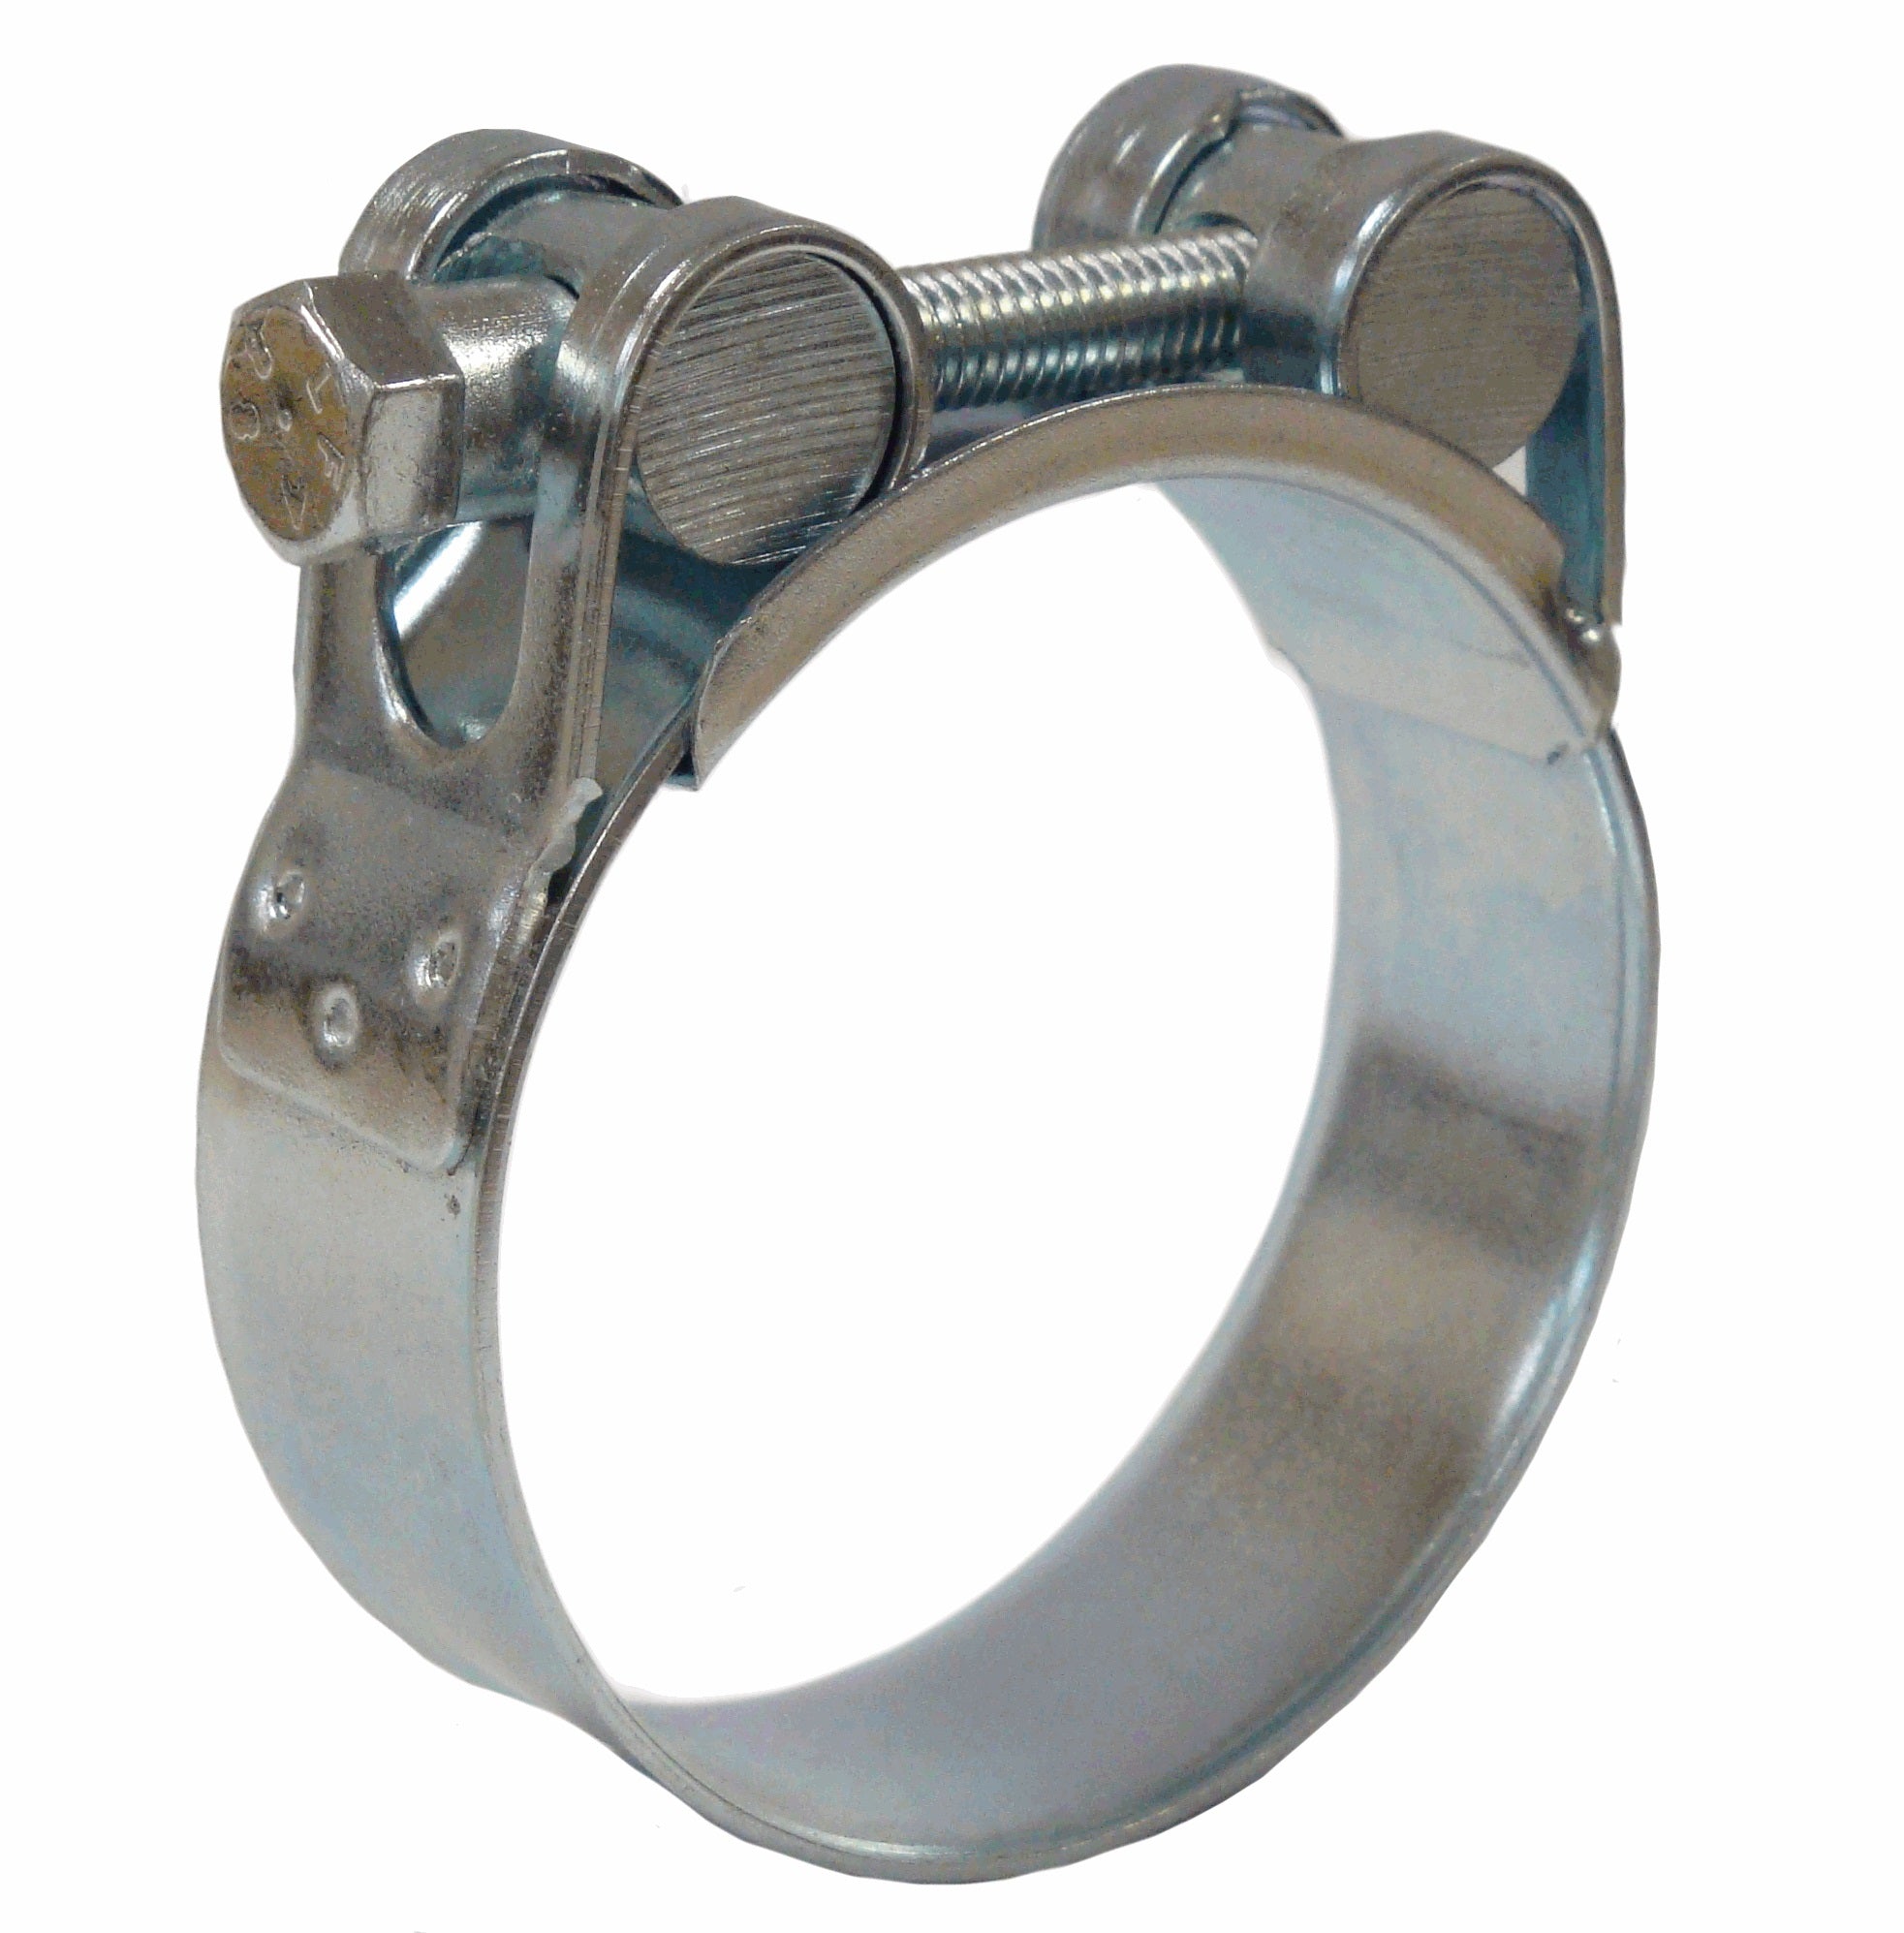 Jubilee® Superclamp 23-25mm 316 Stainless Steel